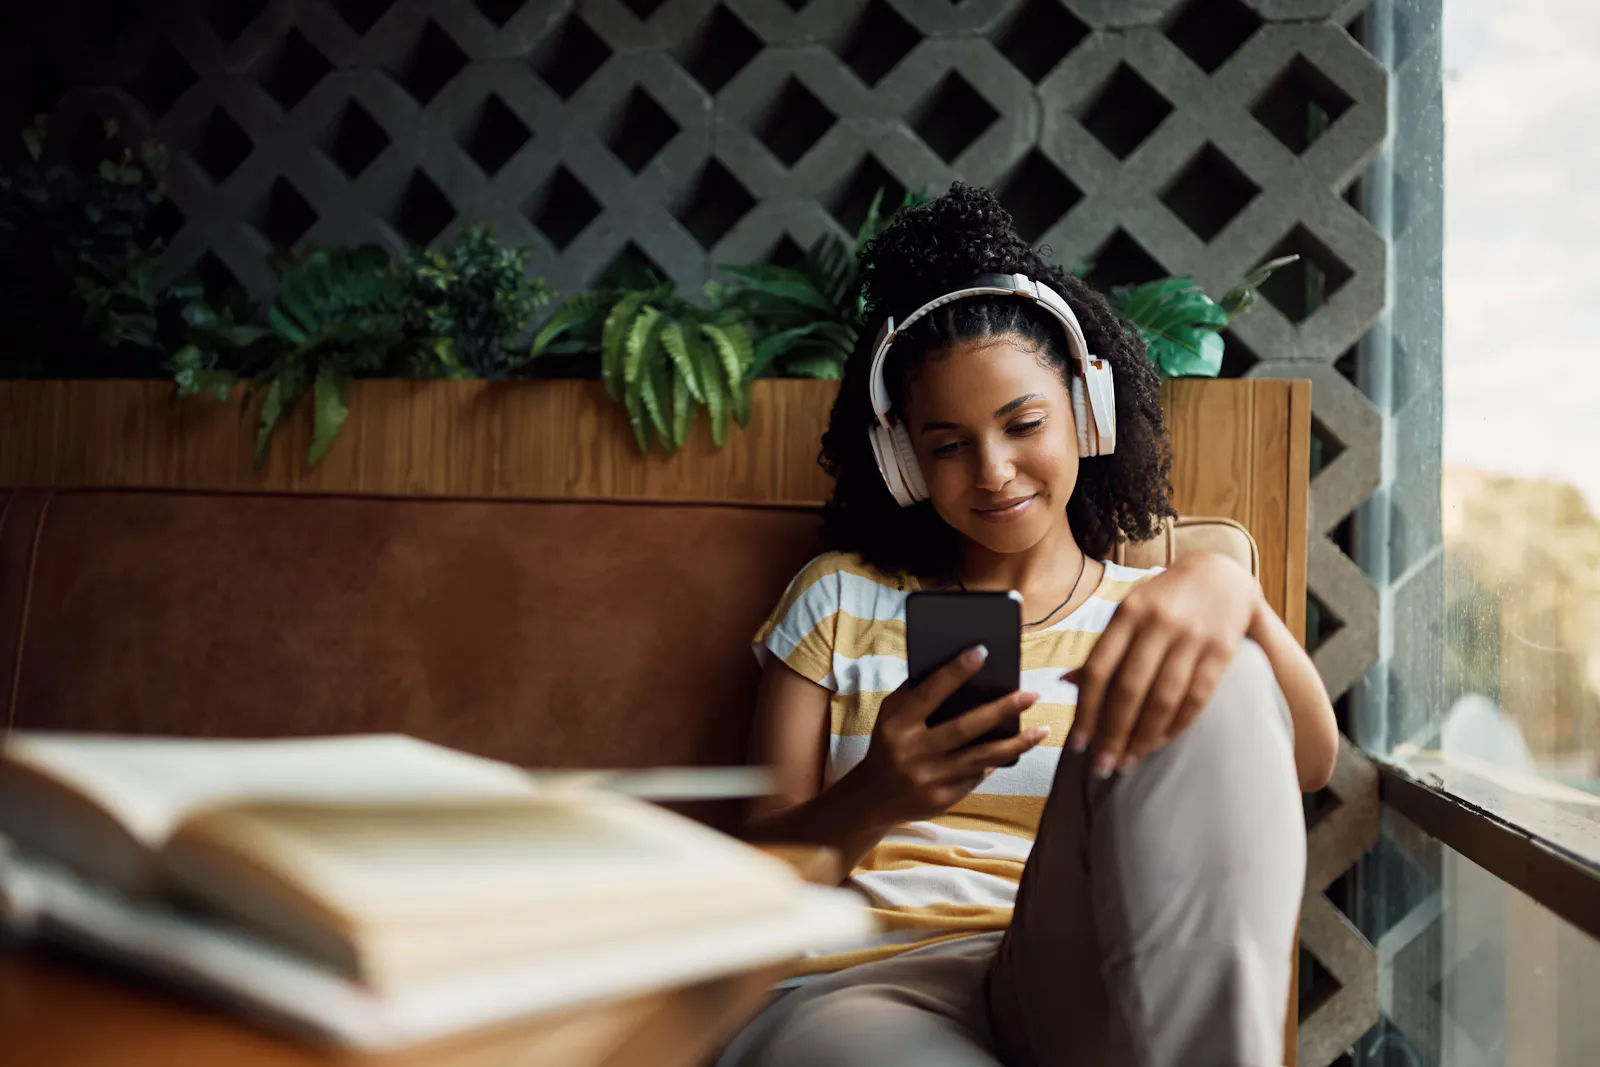 A beautiful black woman wearing white headphones and looking at her phone in a brightly lit room with some plants behind her.